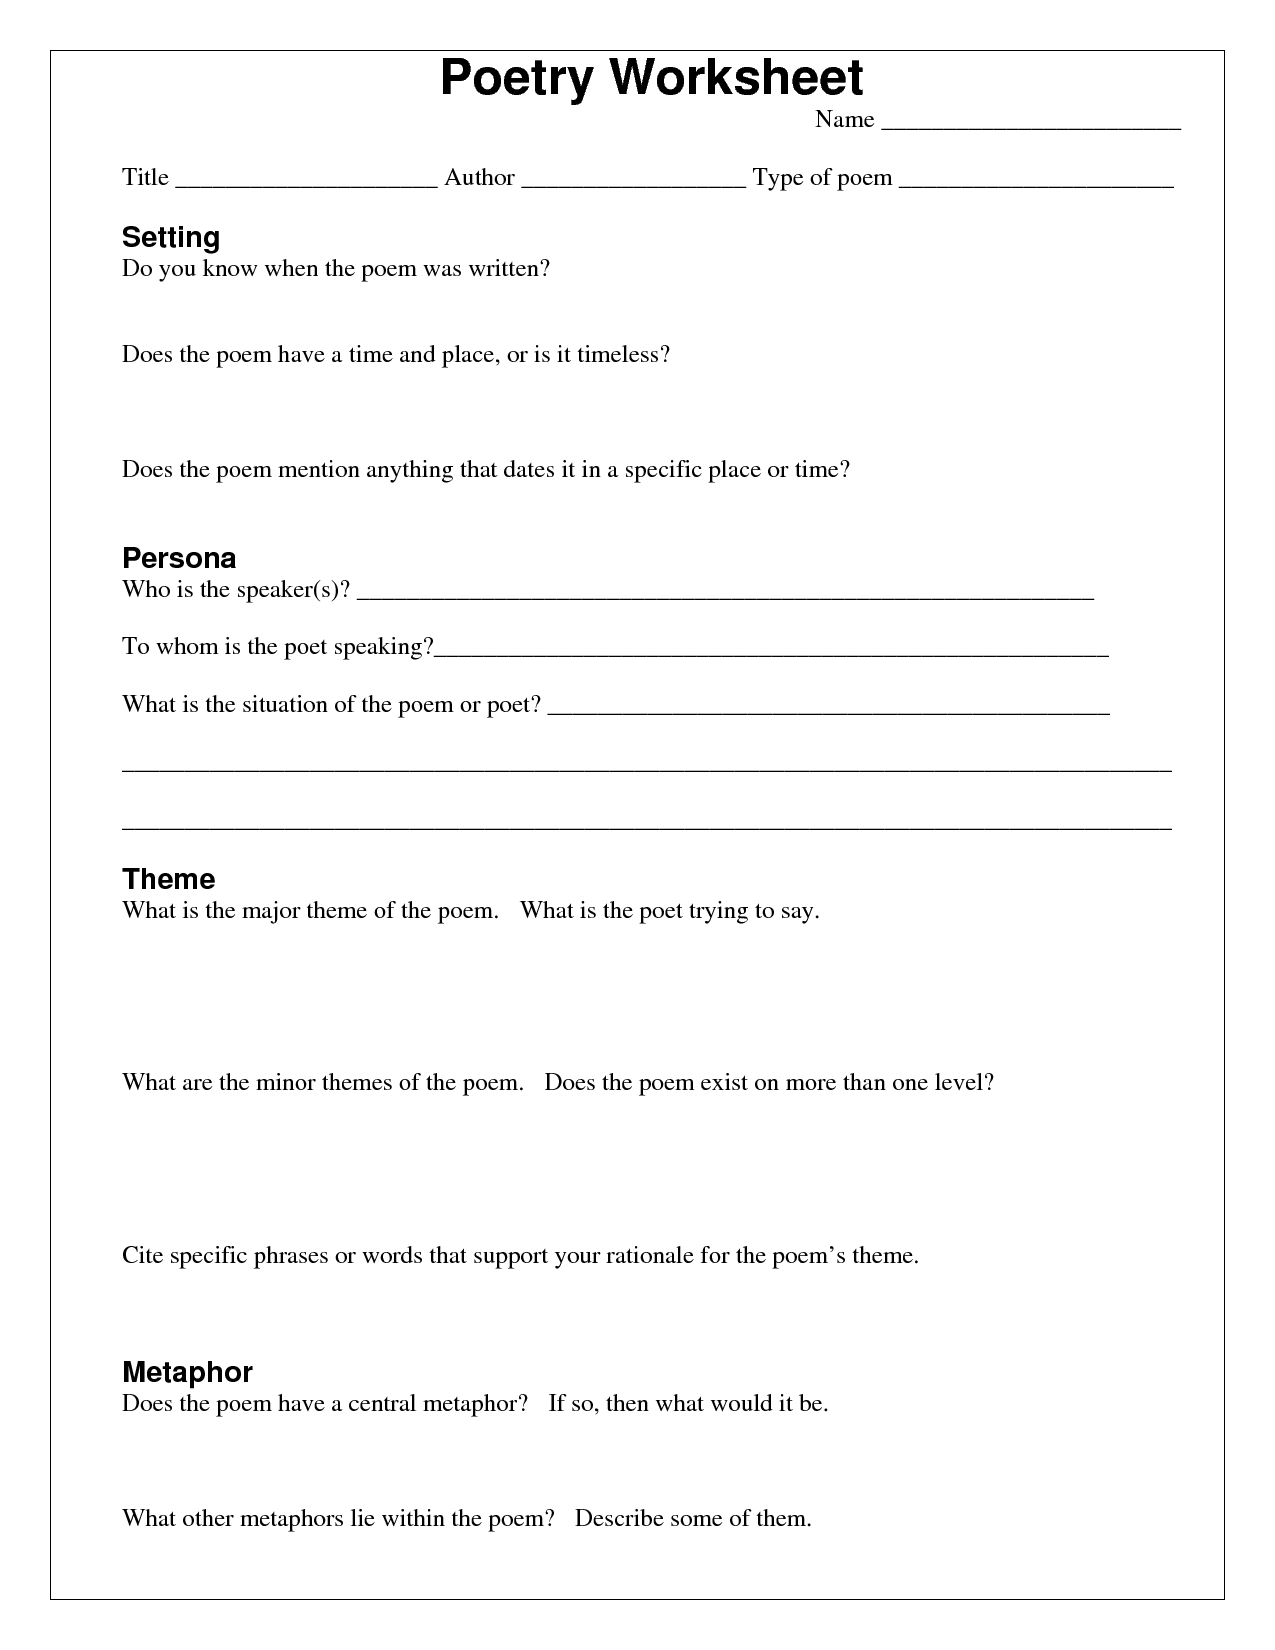 14-best-images-of-types-of-poetry-worksheets-diamante-poem-template-printable-different-types